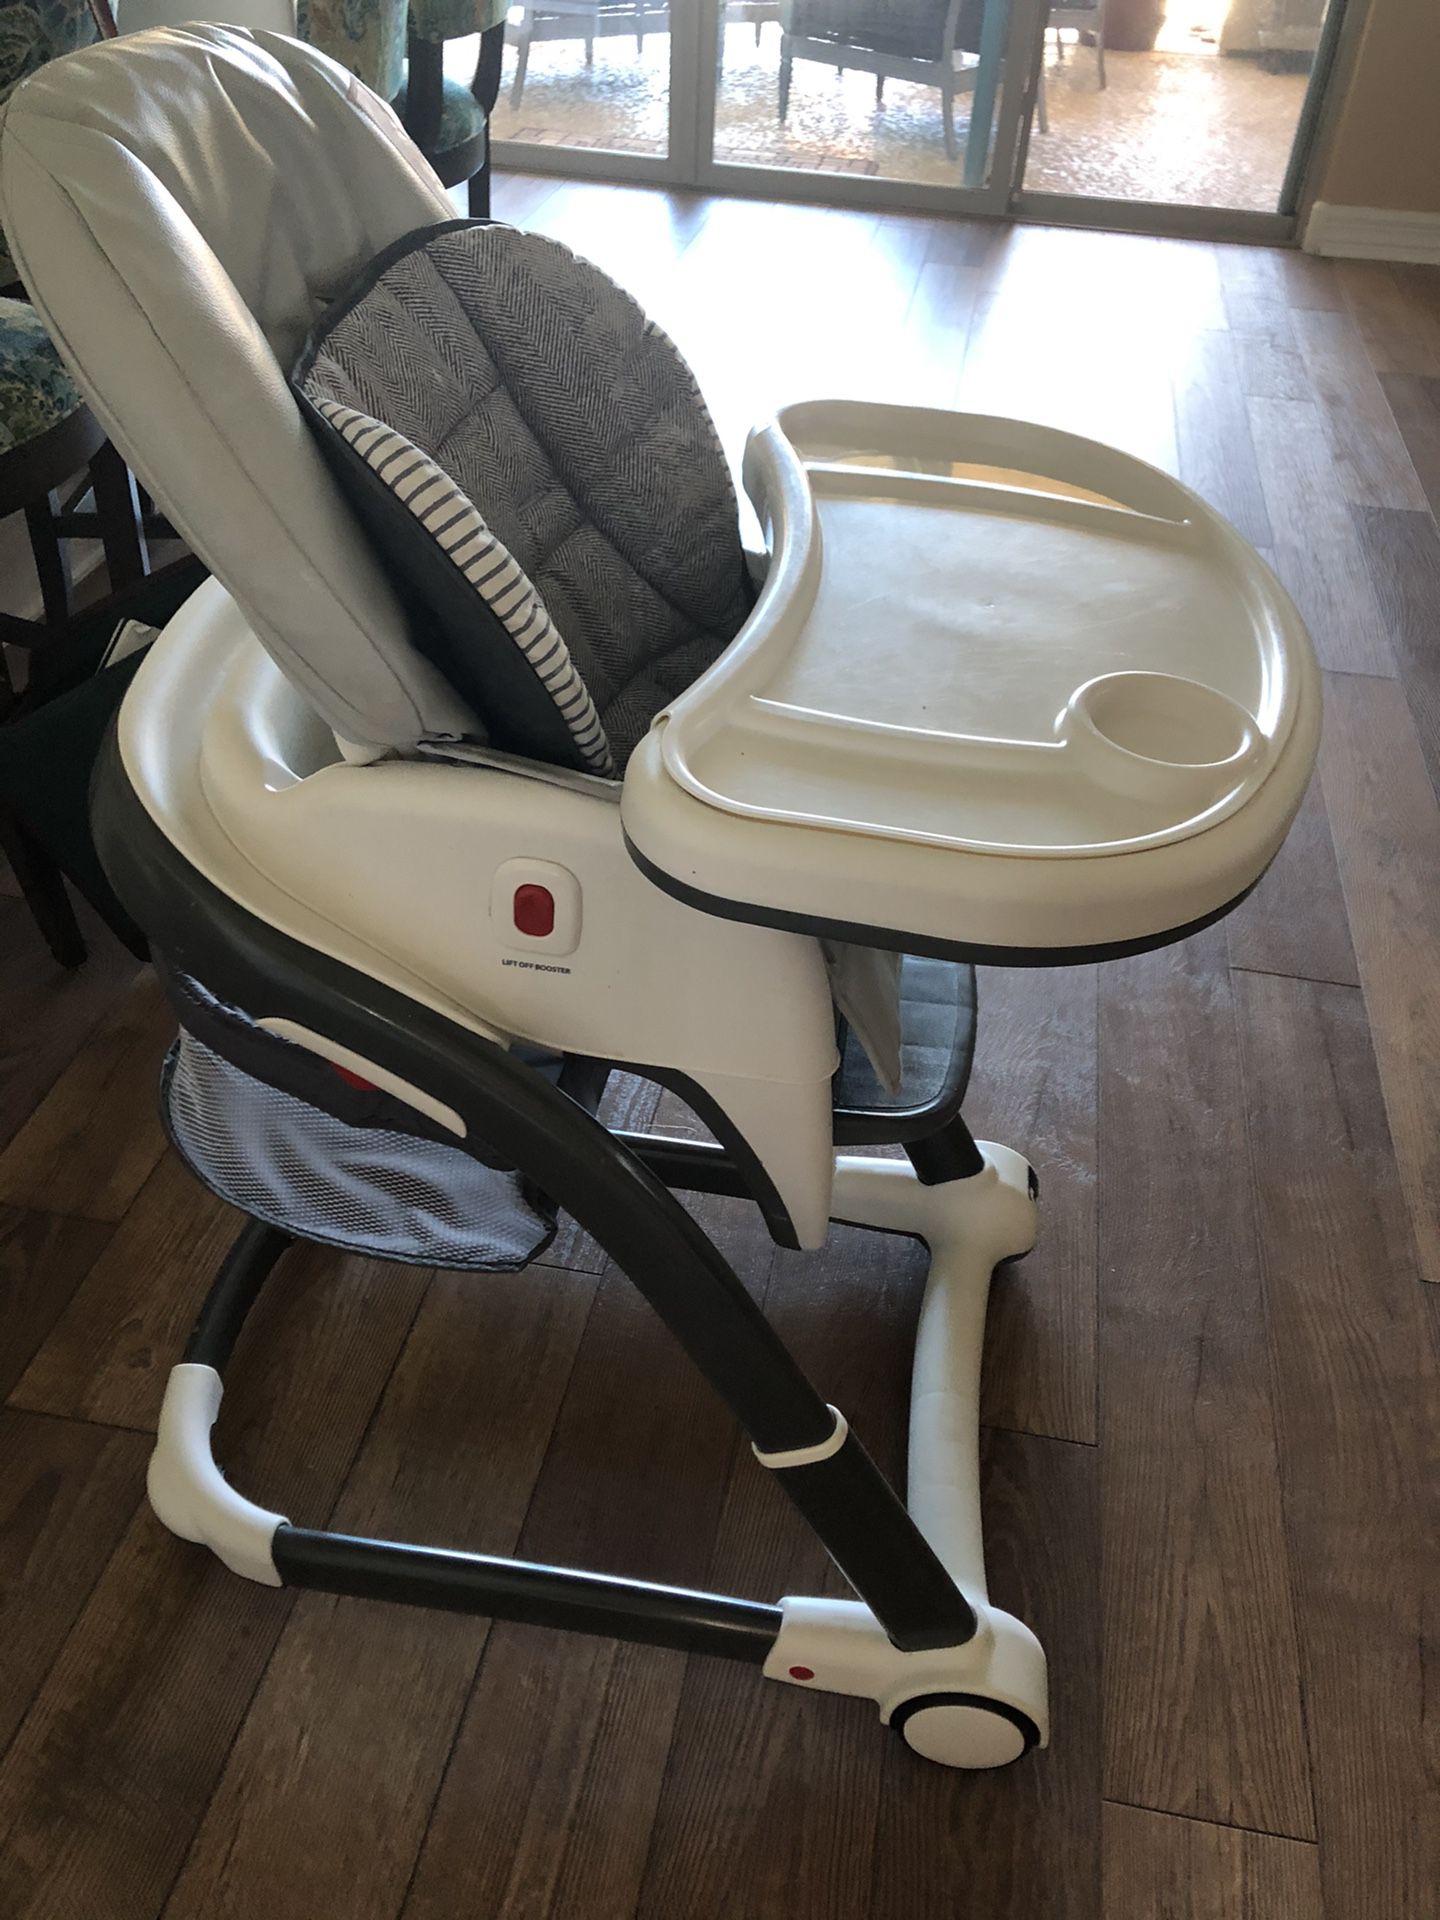 Graco high chair & booster seat